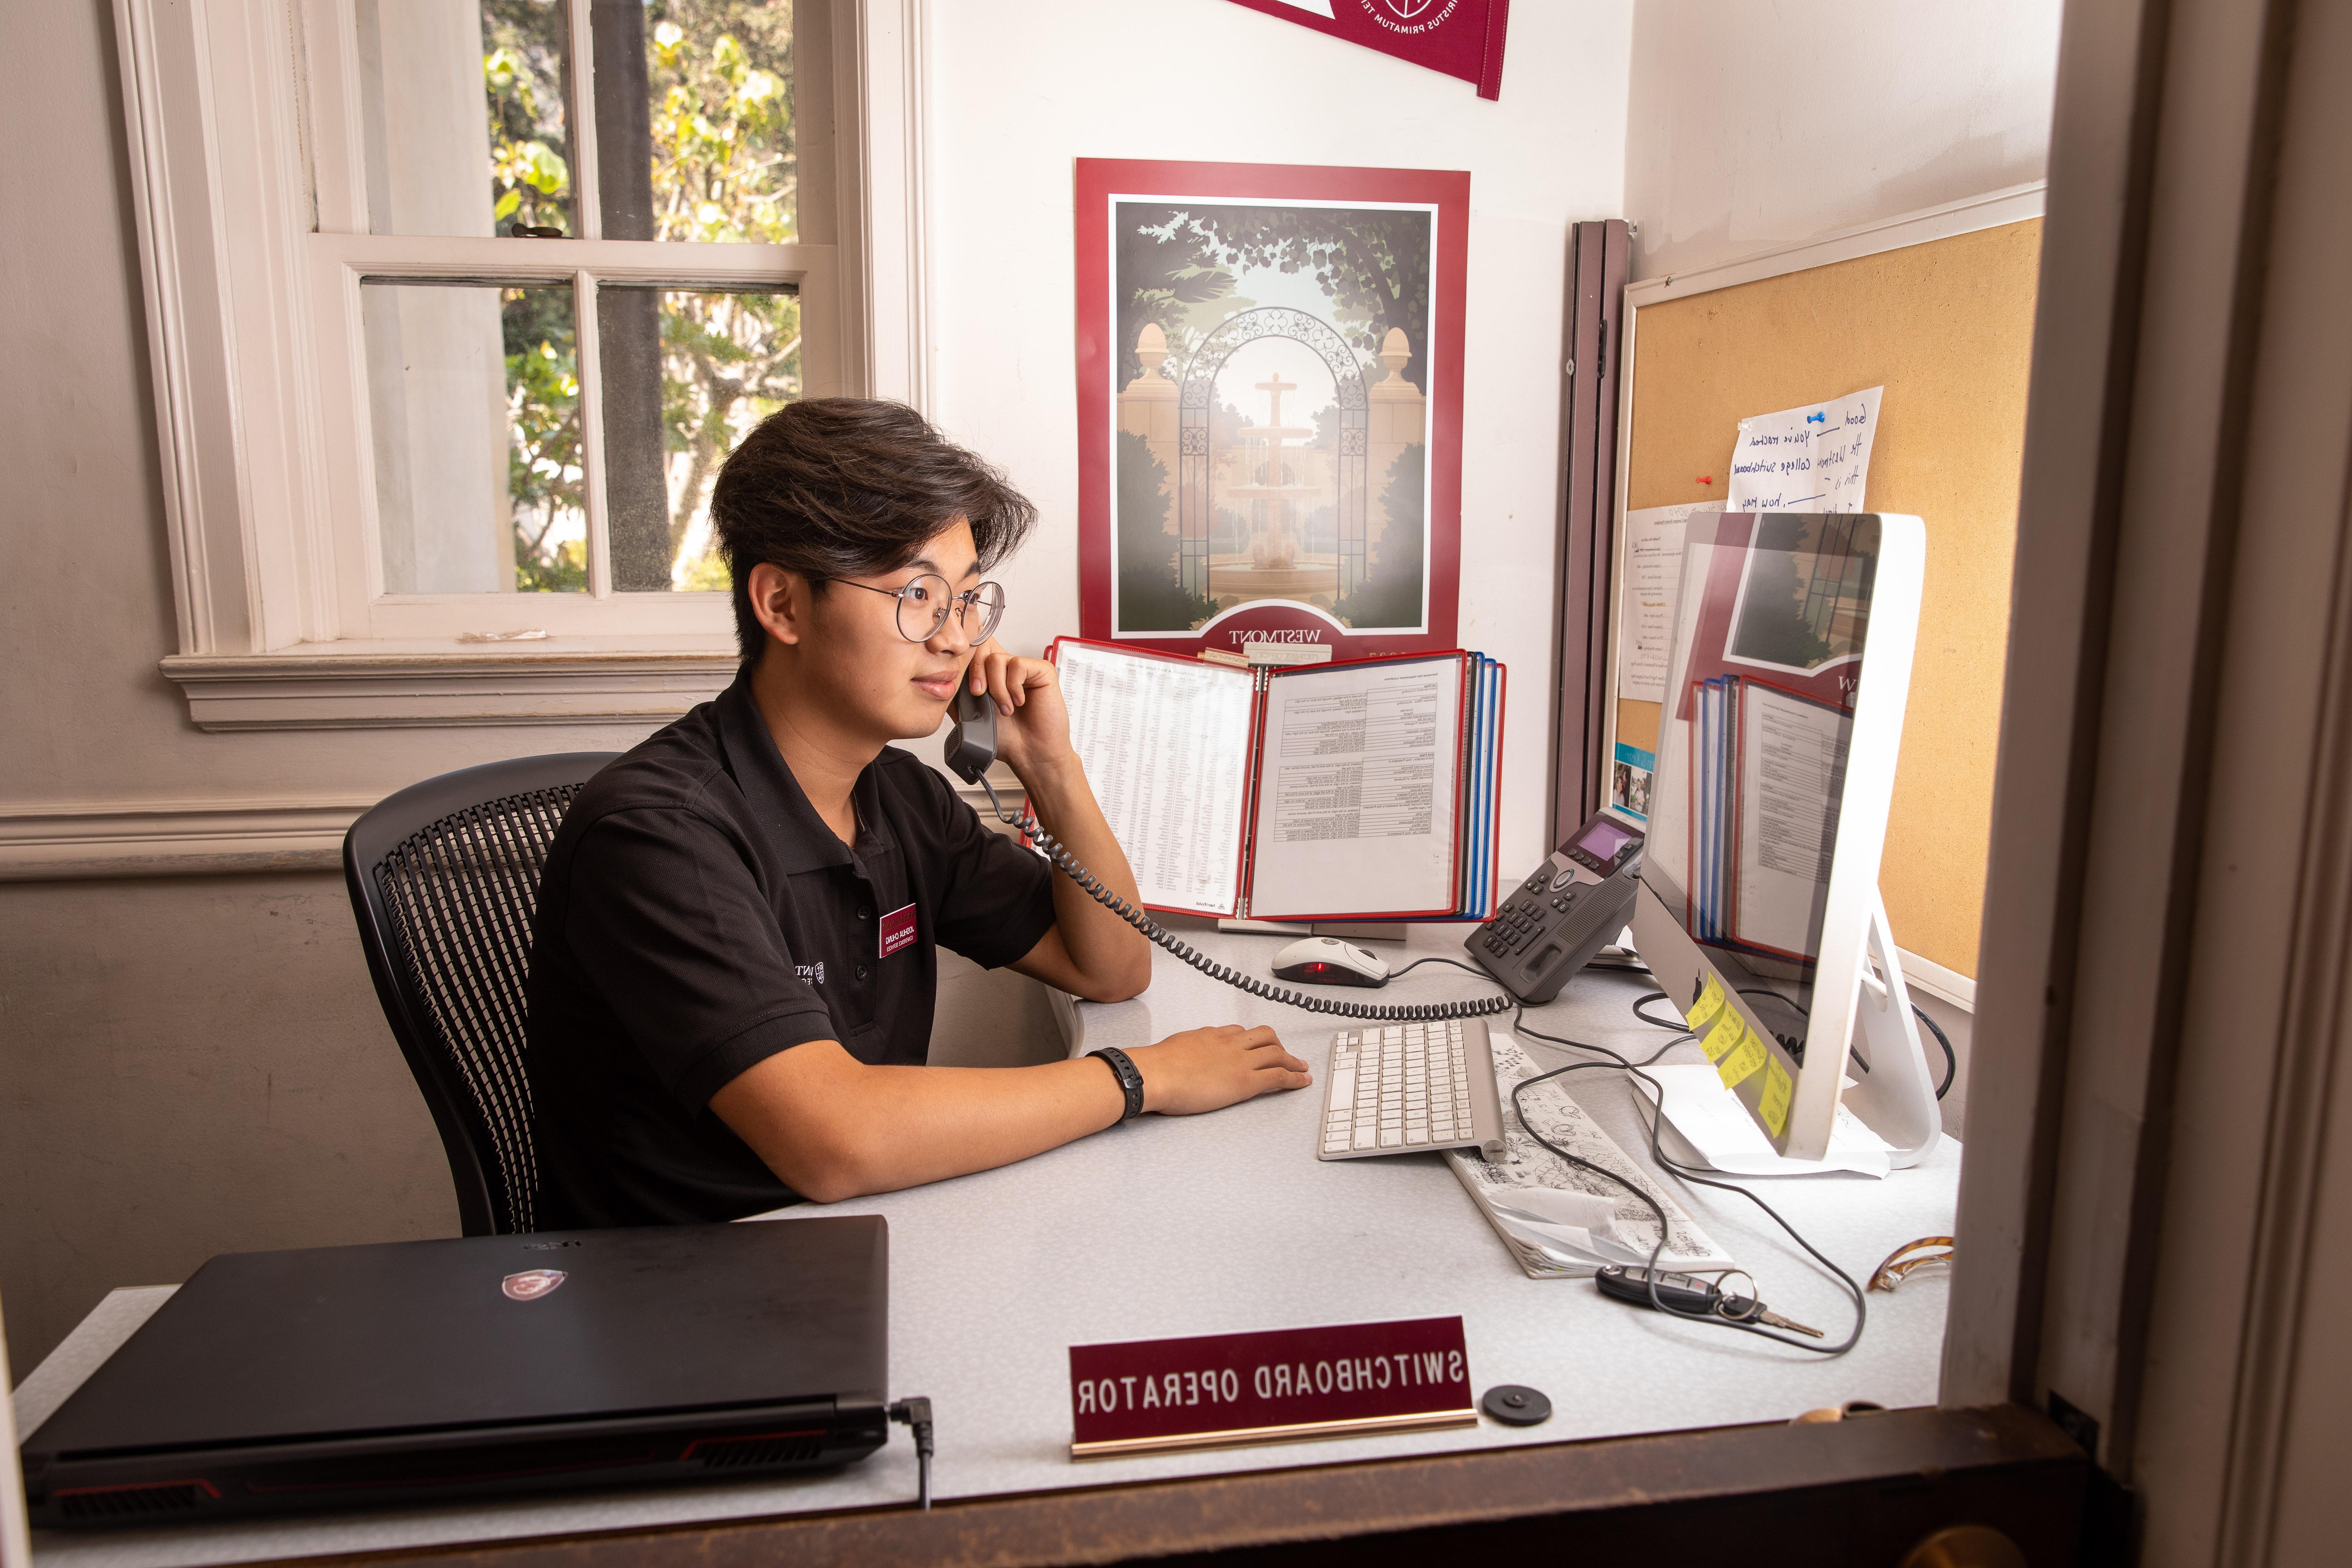 westmont student worker switchboard operator